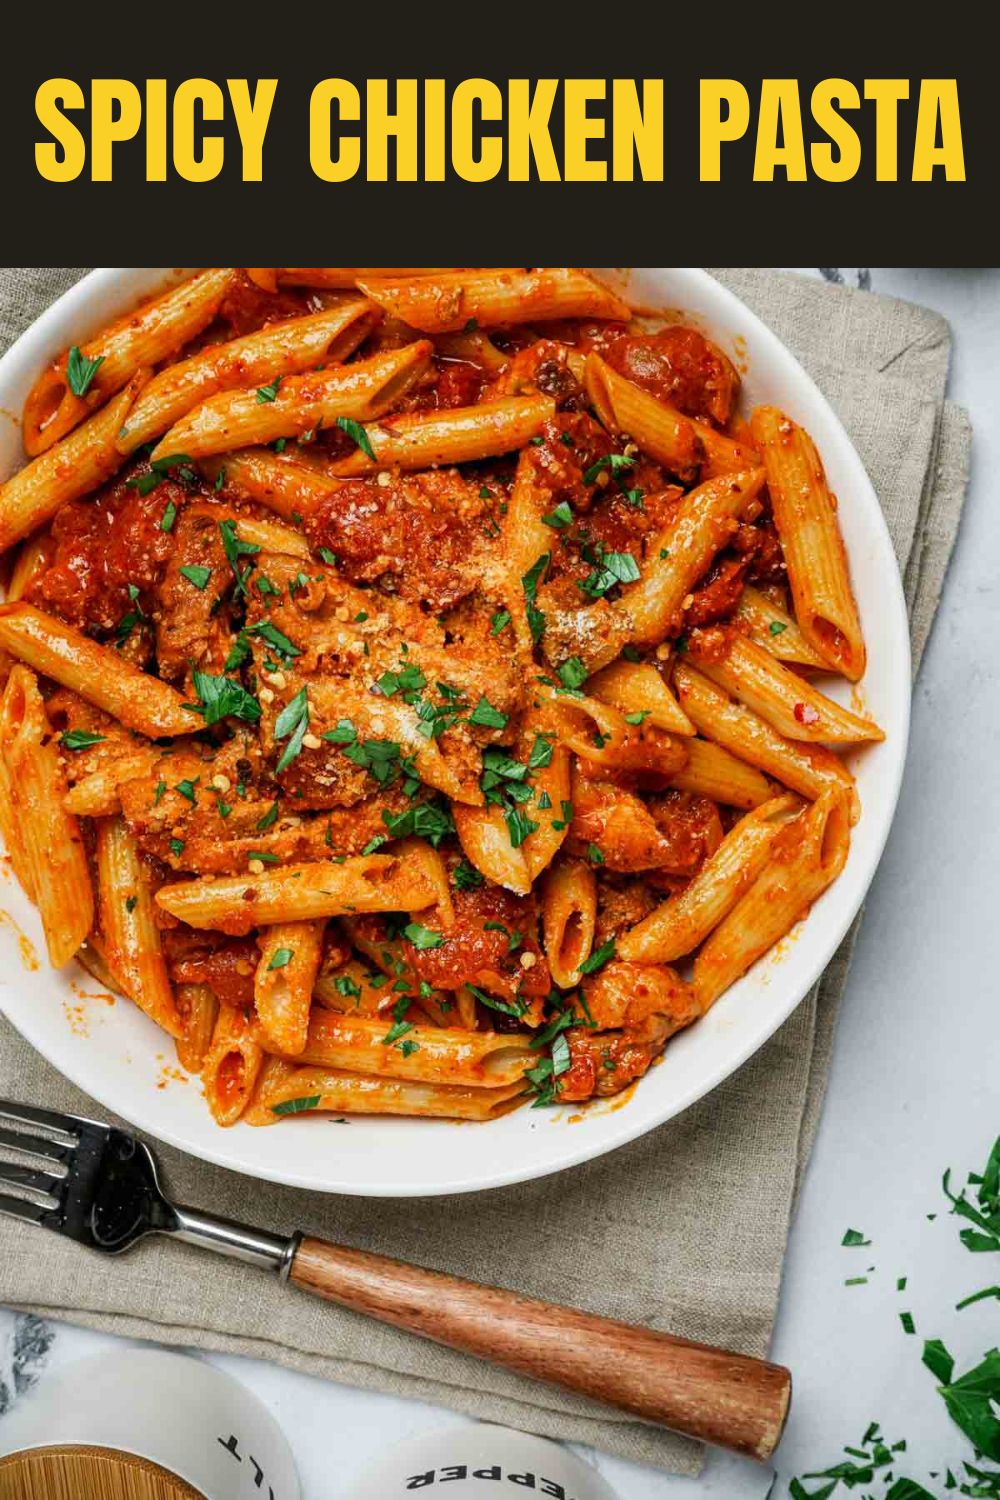 Spicy Chicken Pasta - Ultimate One-Pot Meal!